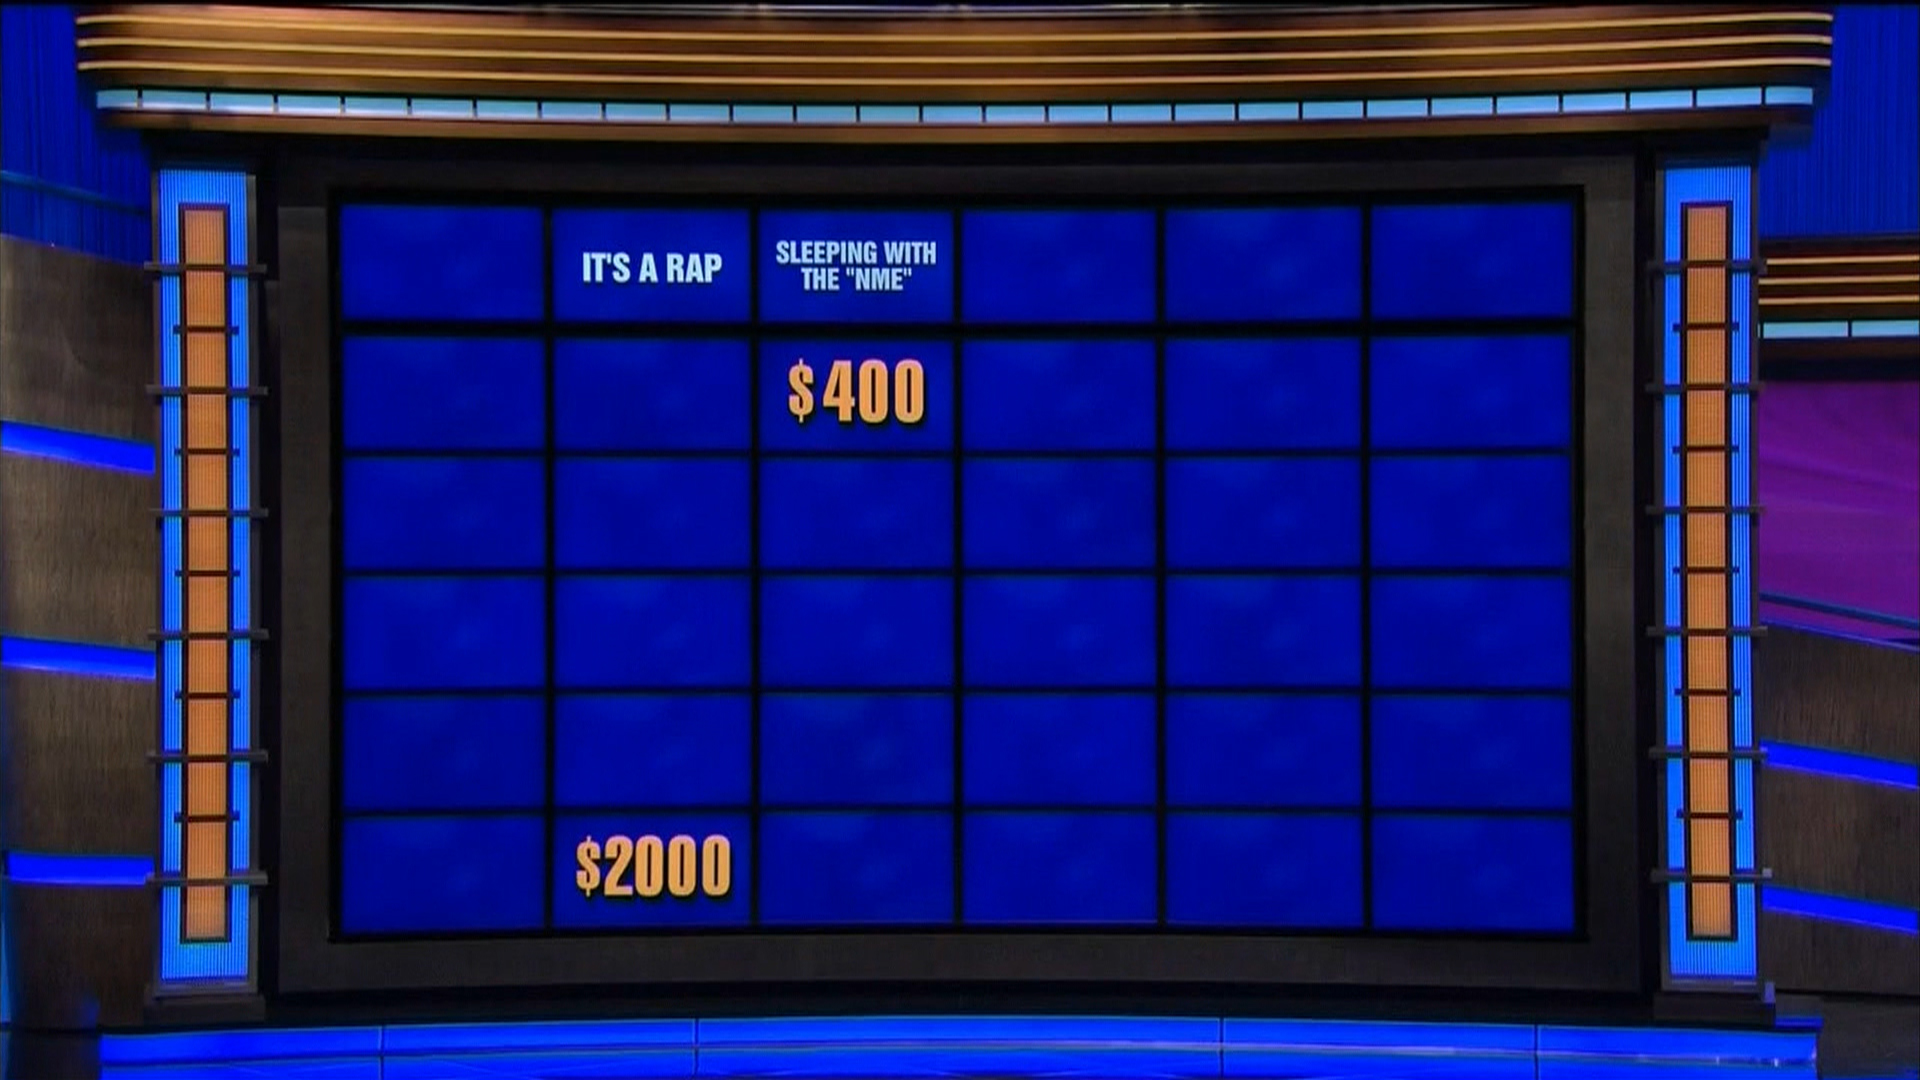 What Jeopardy Host Has Bee A Rapper Today